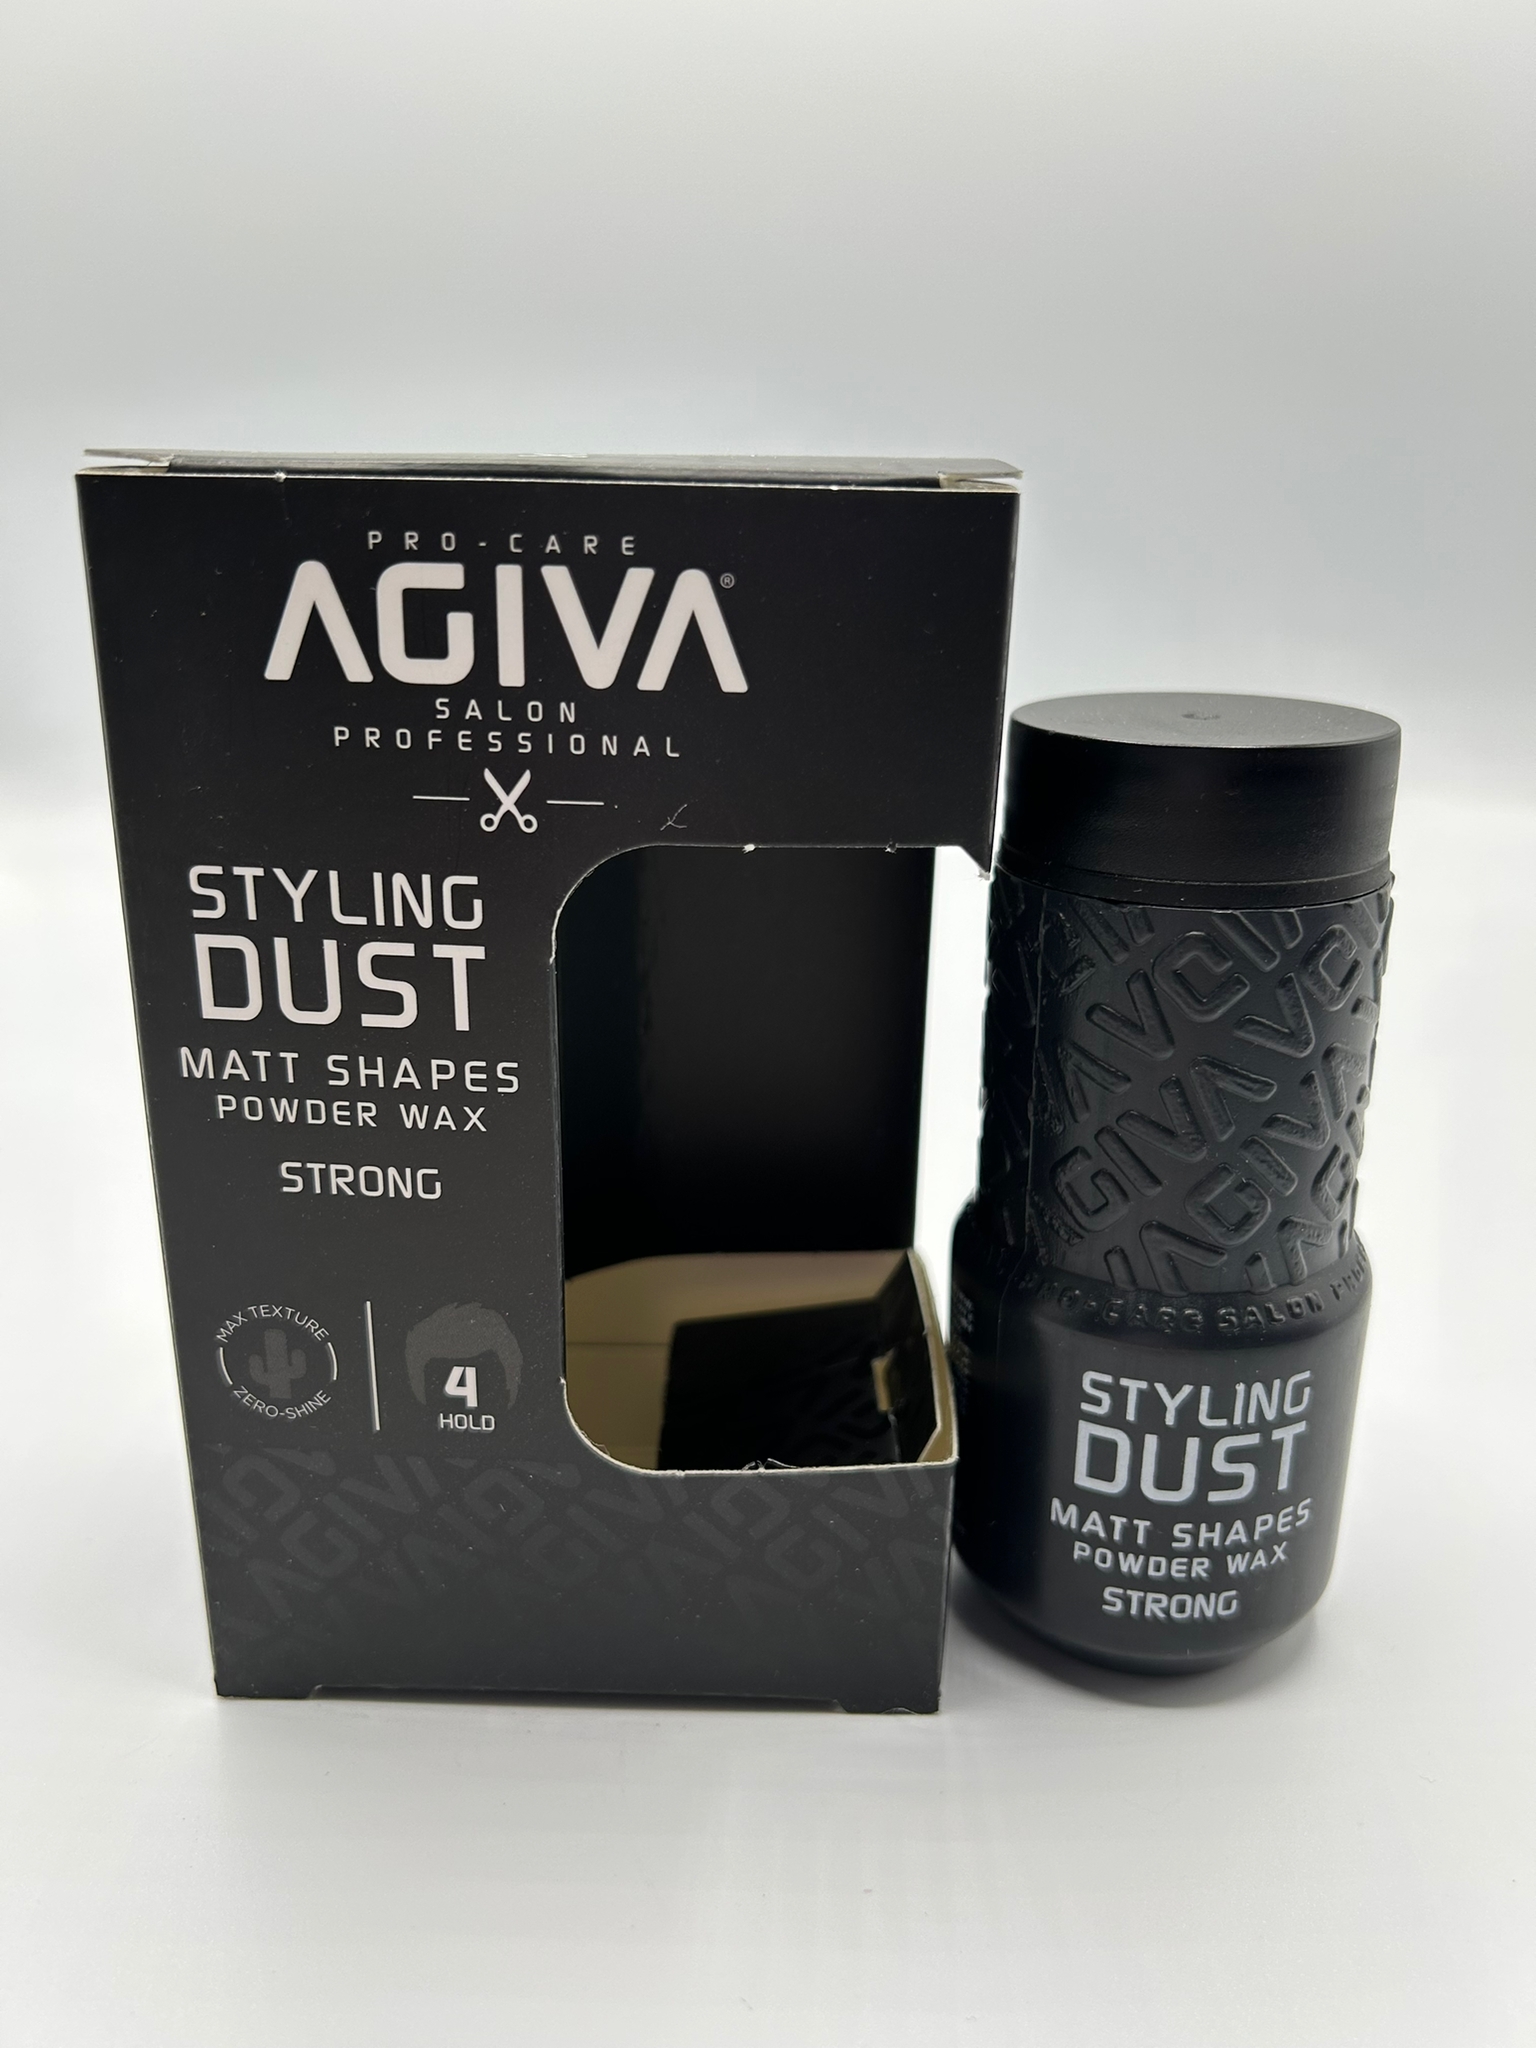 AGIVA HAIR POWDER NO 02 STRONG STYLING